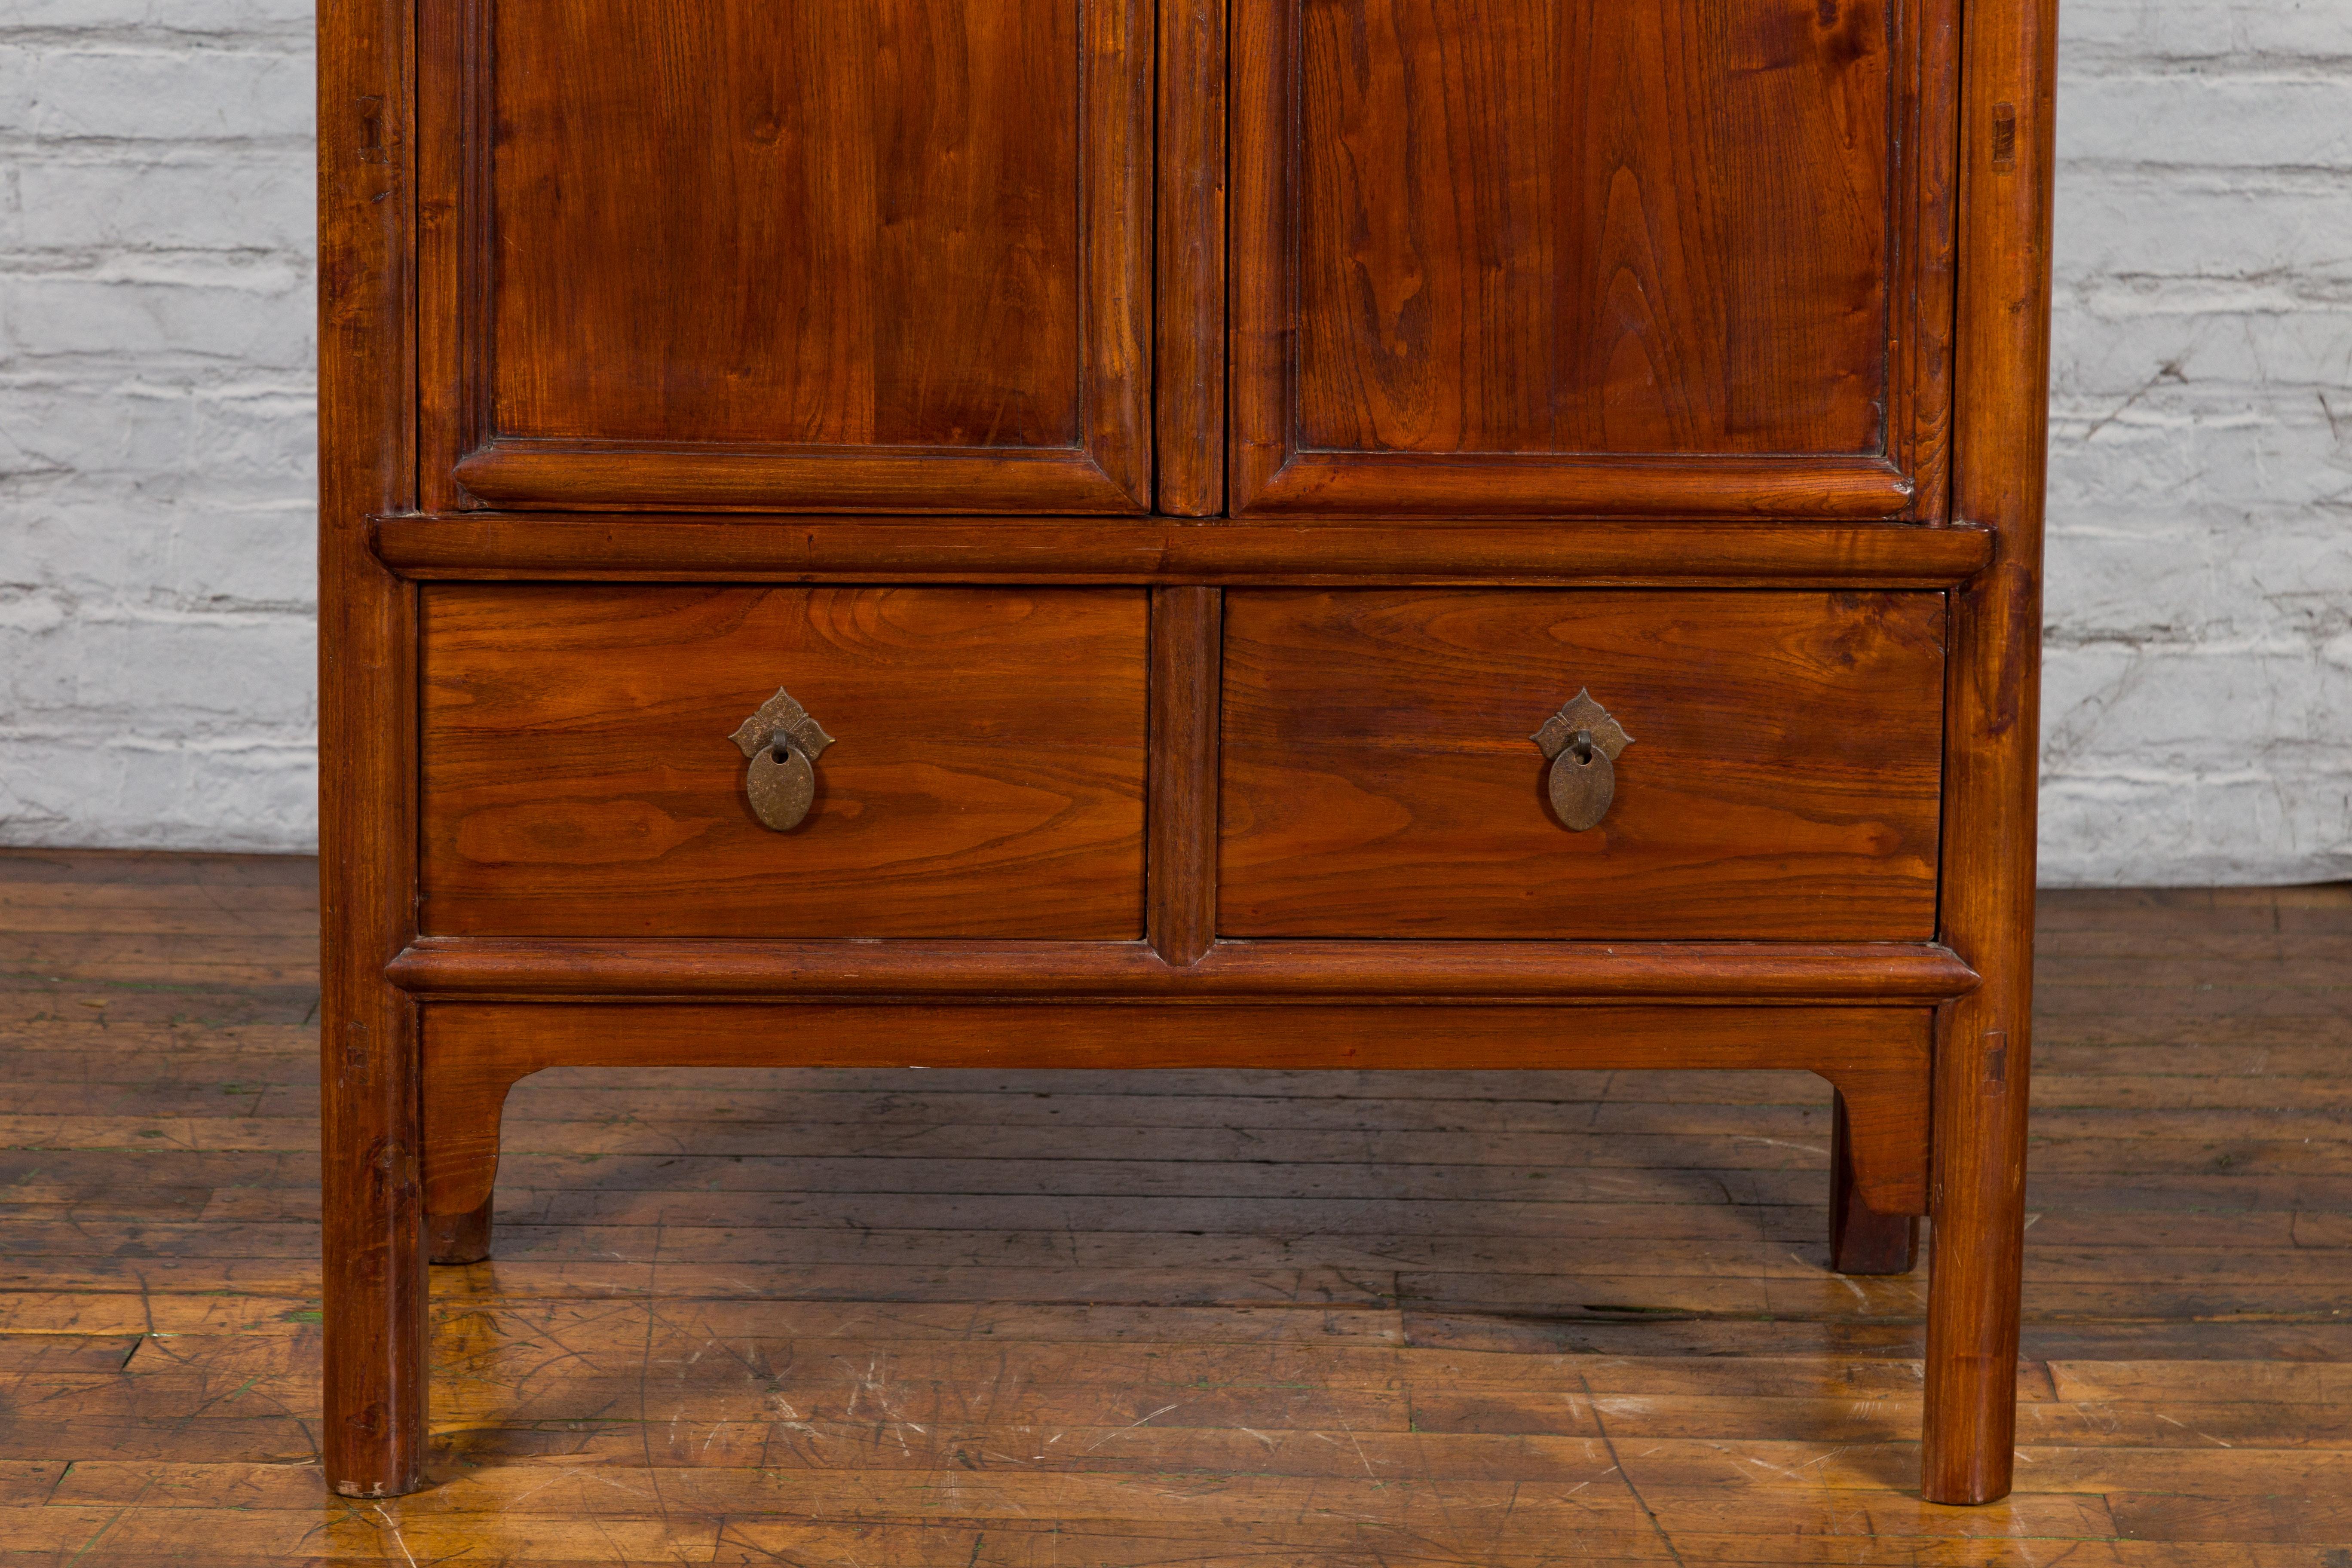 Chinese 19th Century Qing Dynasty Period Elmwood Cabinet with Doors and Drawers For Sale 4